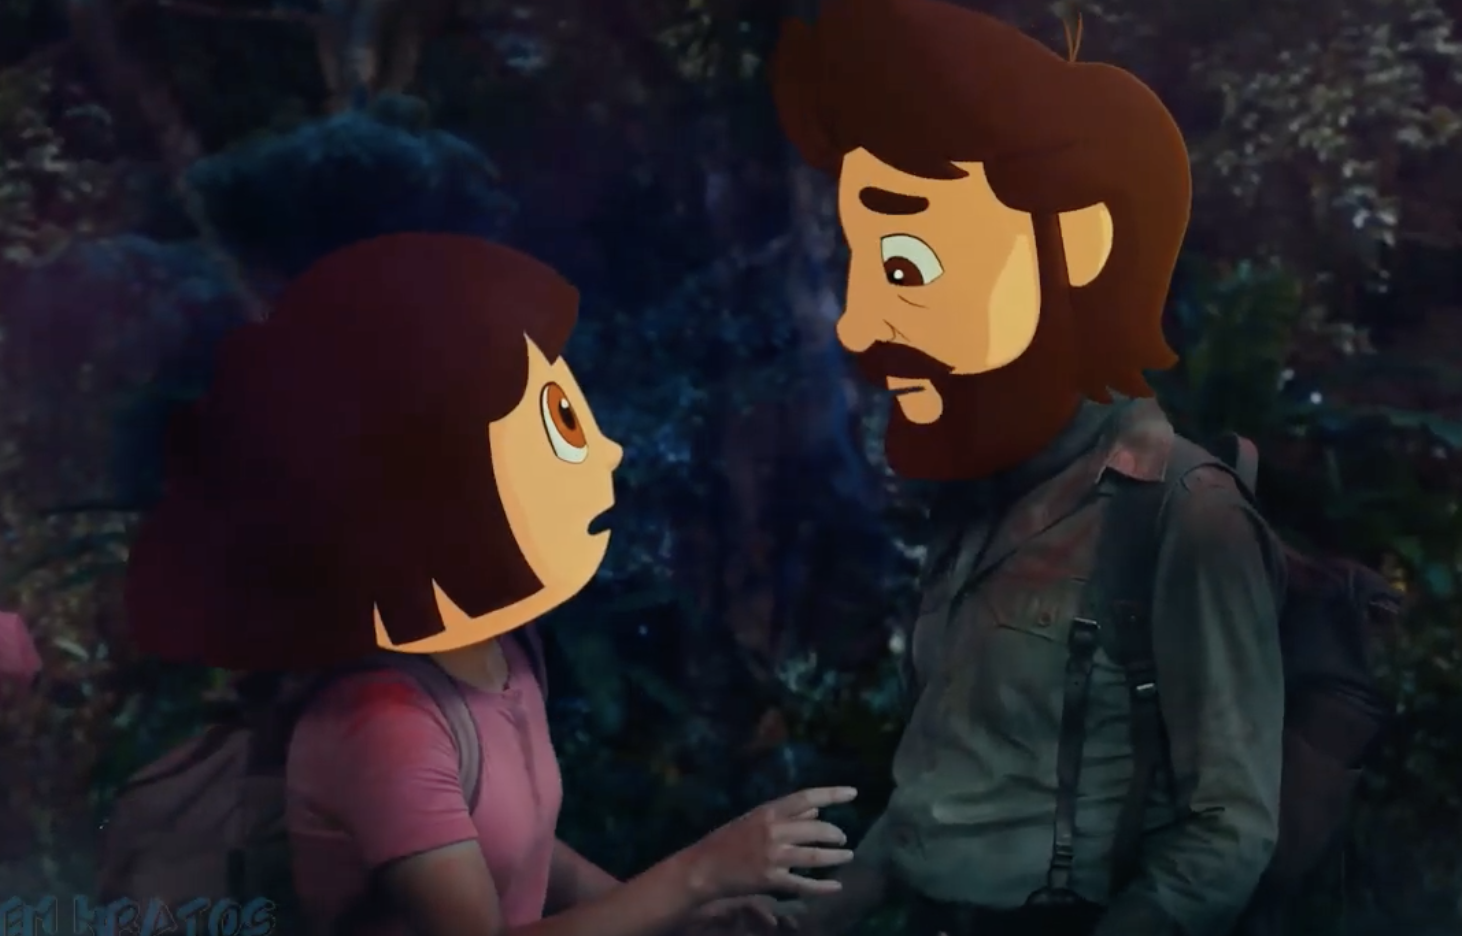 Dora and her friend have human bodies but cartoon heads.